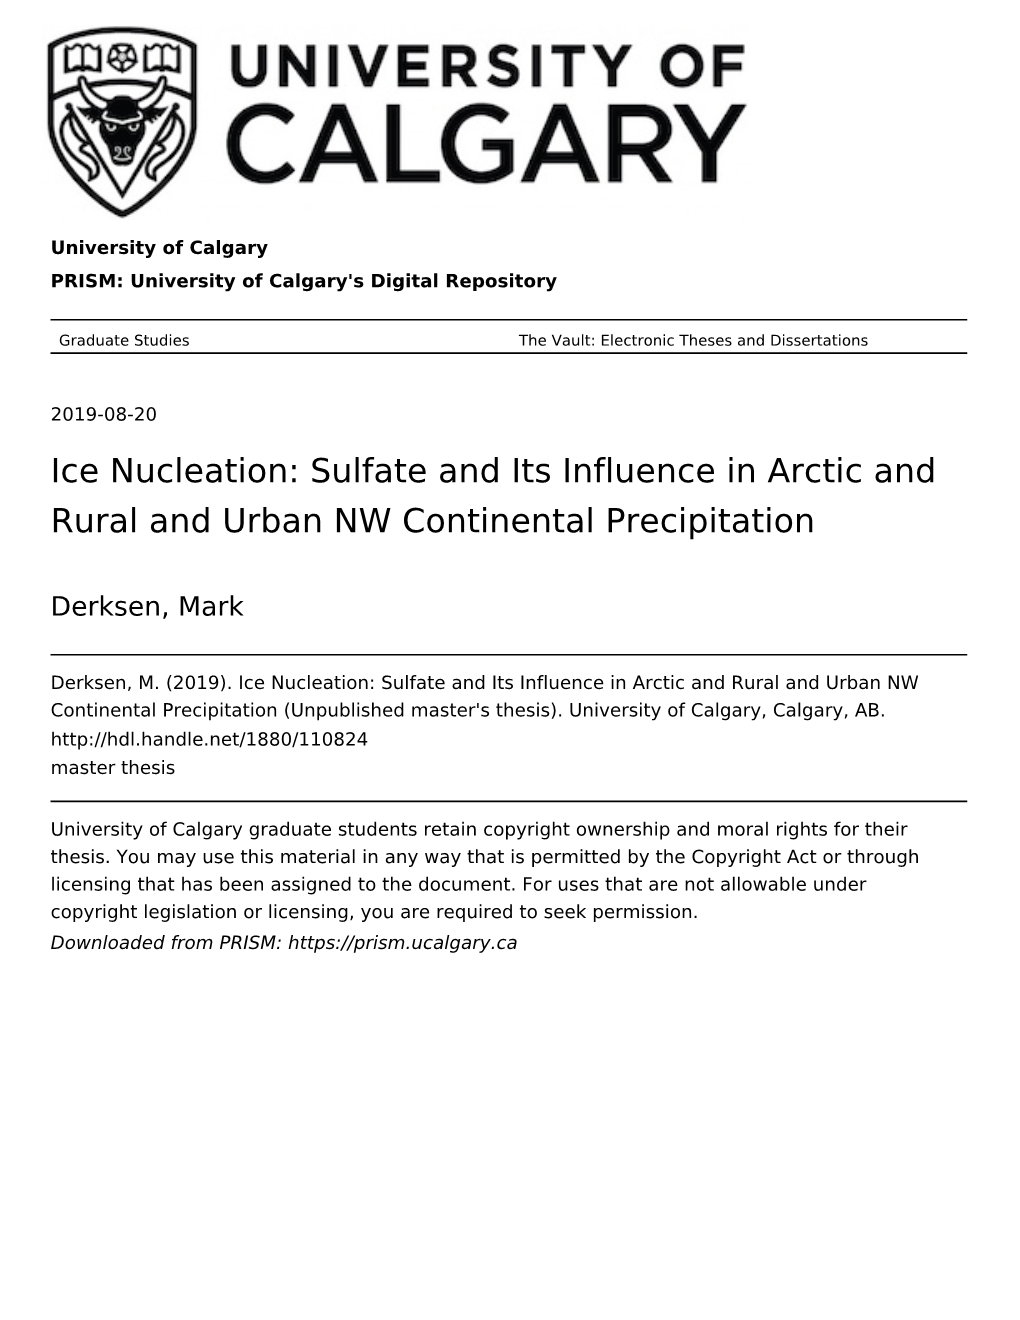 Ice Nucleation: Sulfate and Its Influence in Arctic and Rural and Urban NW Continental Precipitation